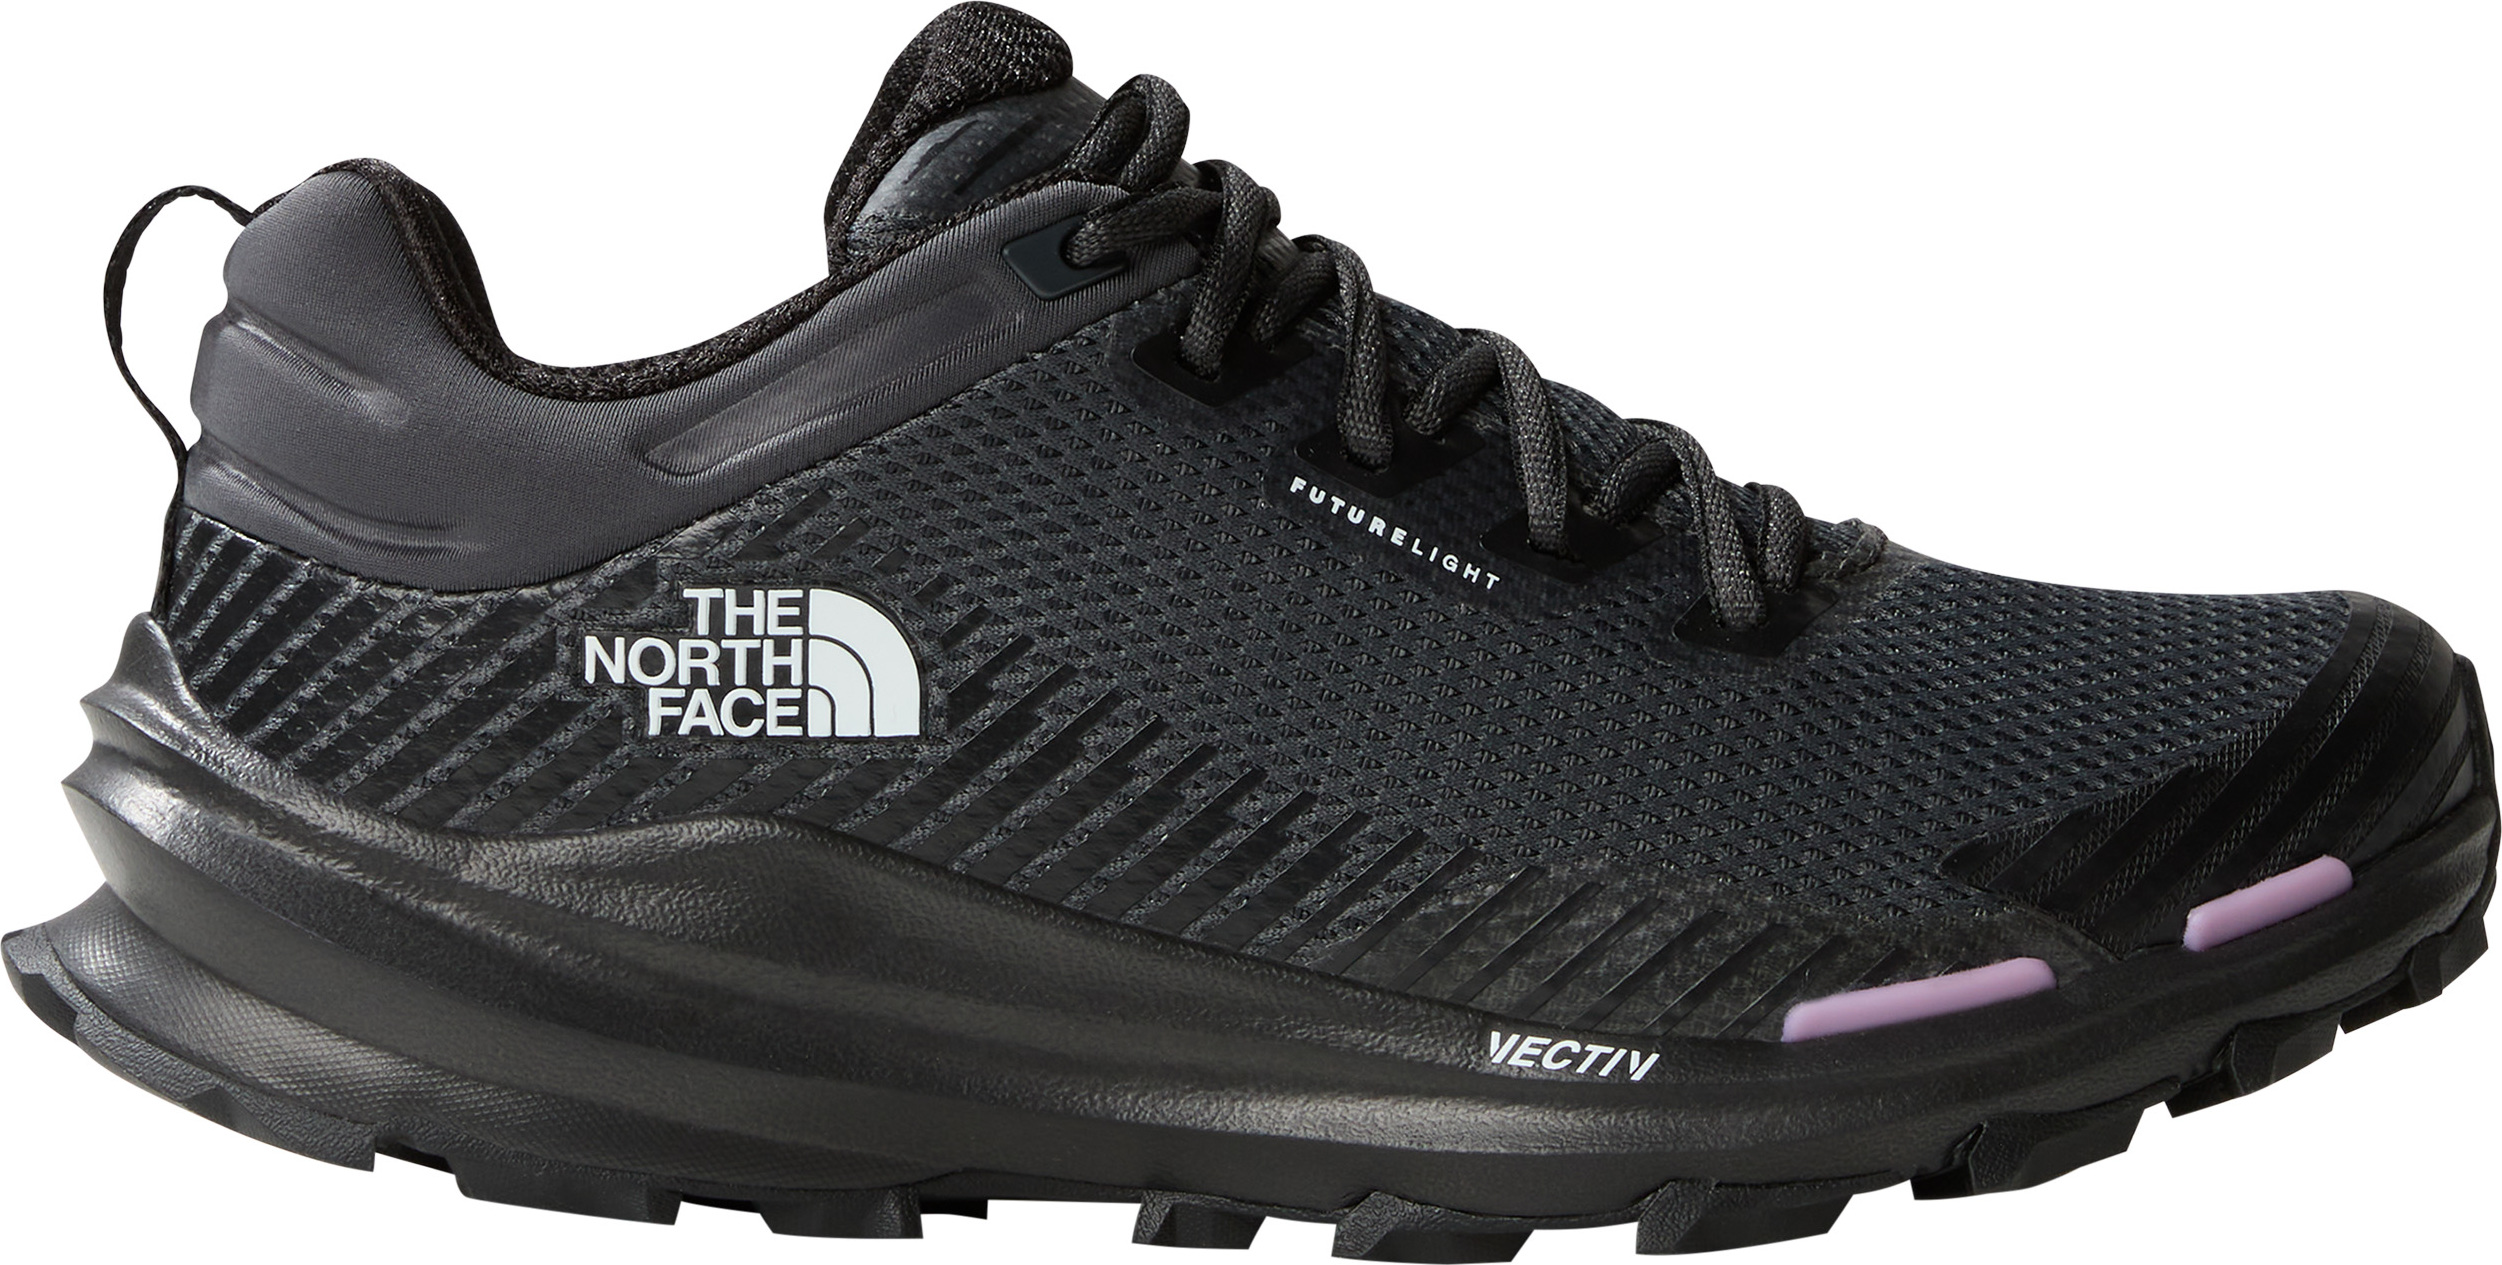 The North Face Women's Vectiv Fastpack Futurelight Tnf Black/Asphalt Grey 38.5, Tnf Black/Asphalt Grey